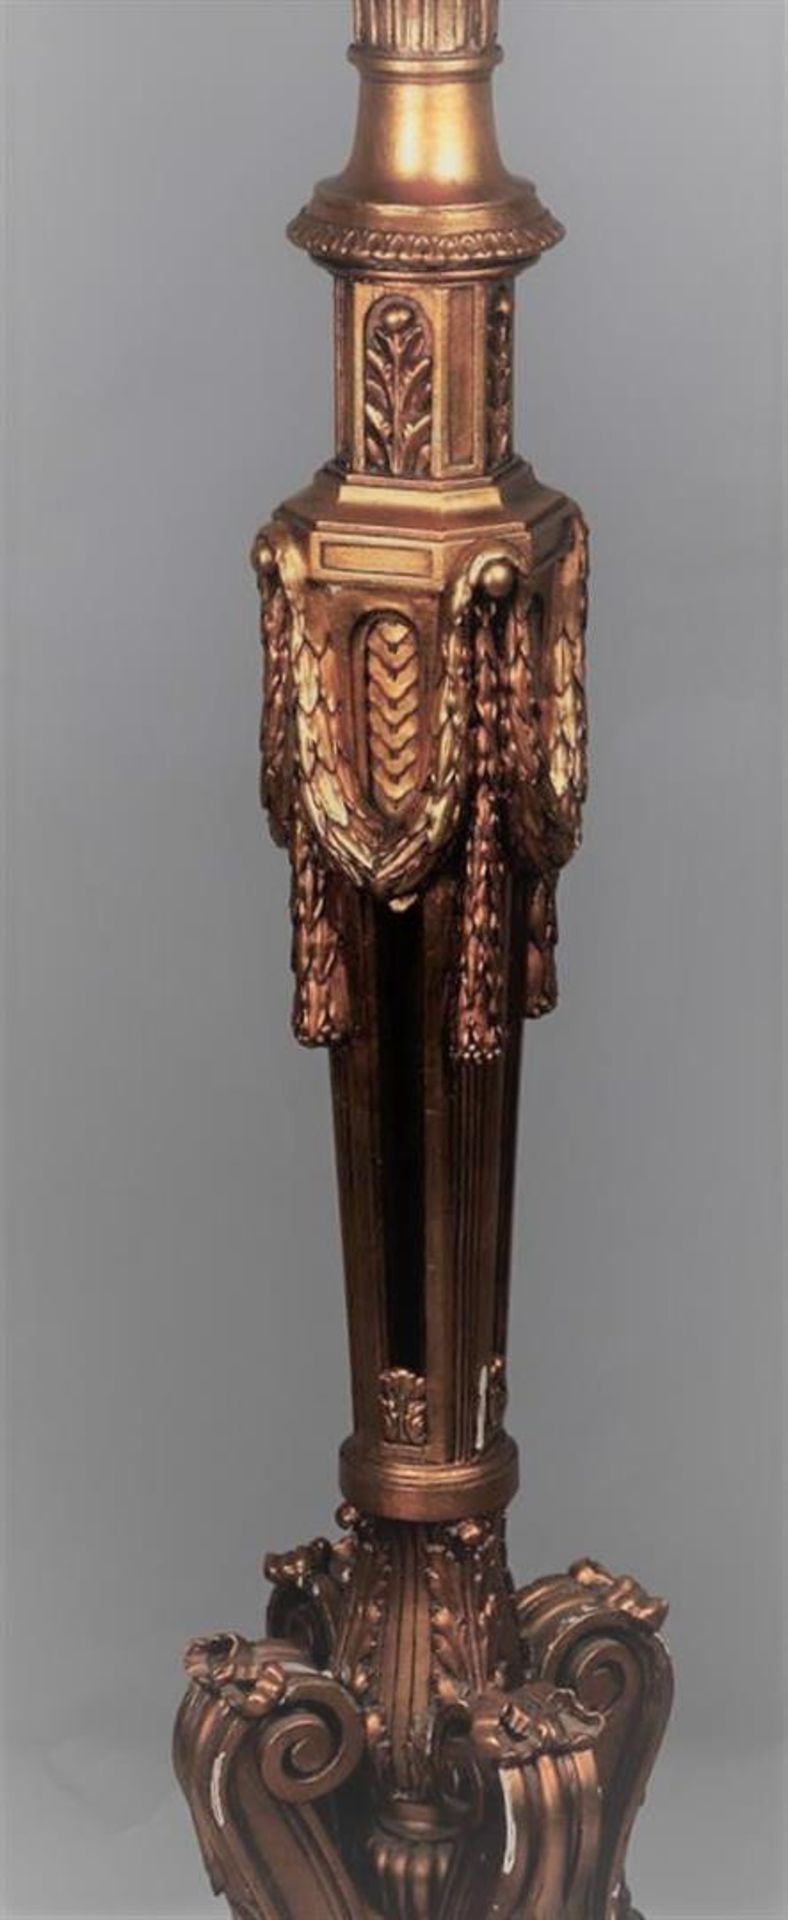 A richly decorated, bronzed wooden pedestal after an older example, 20th century. - Image 3 of 4